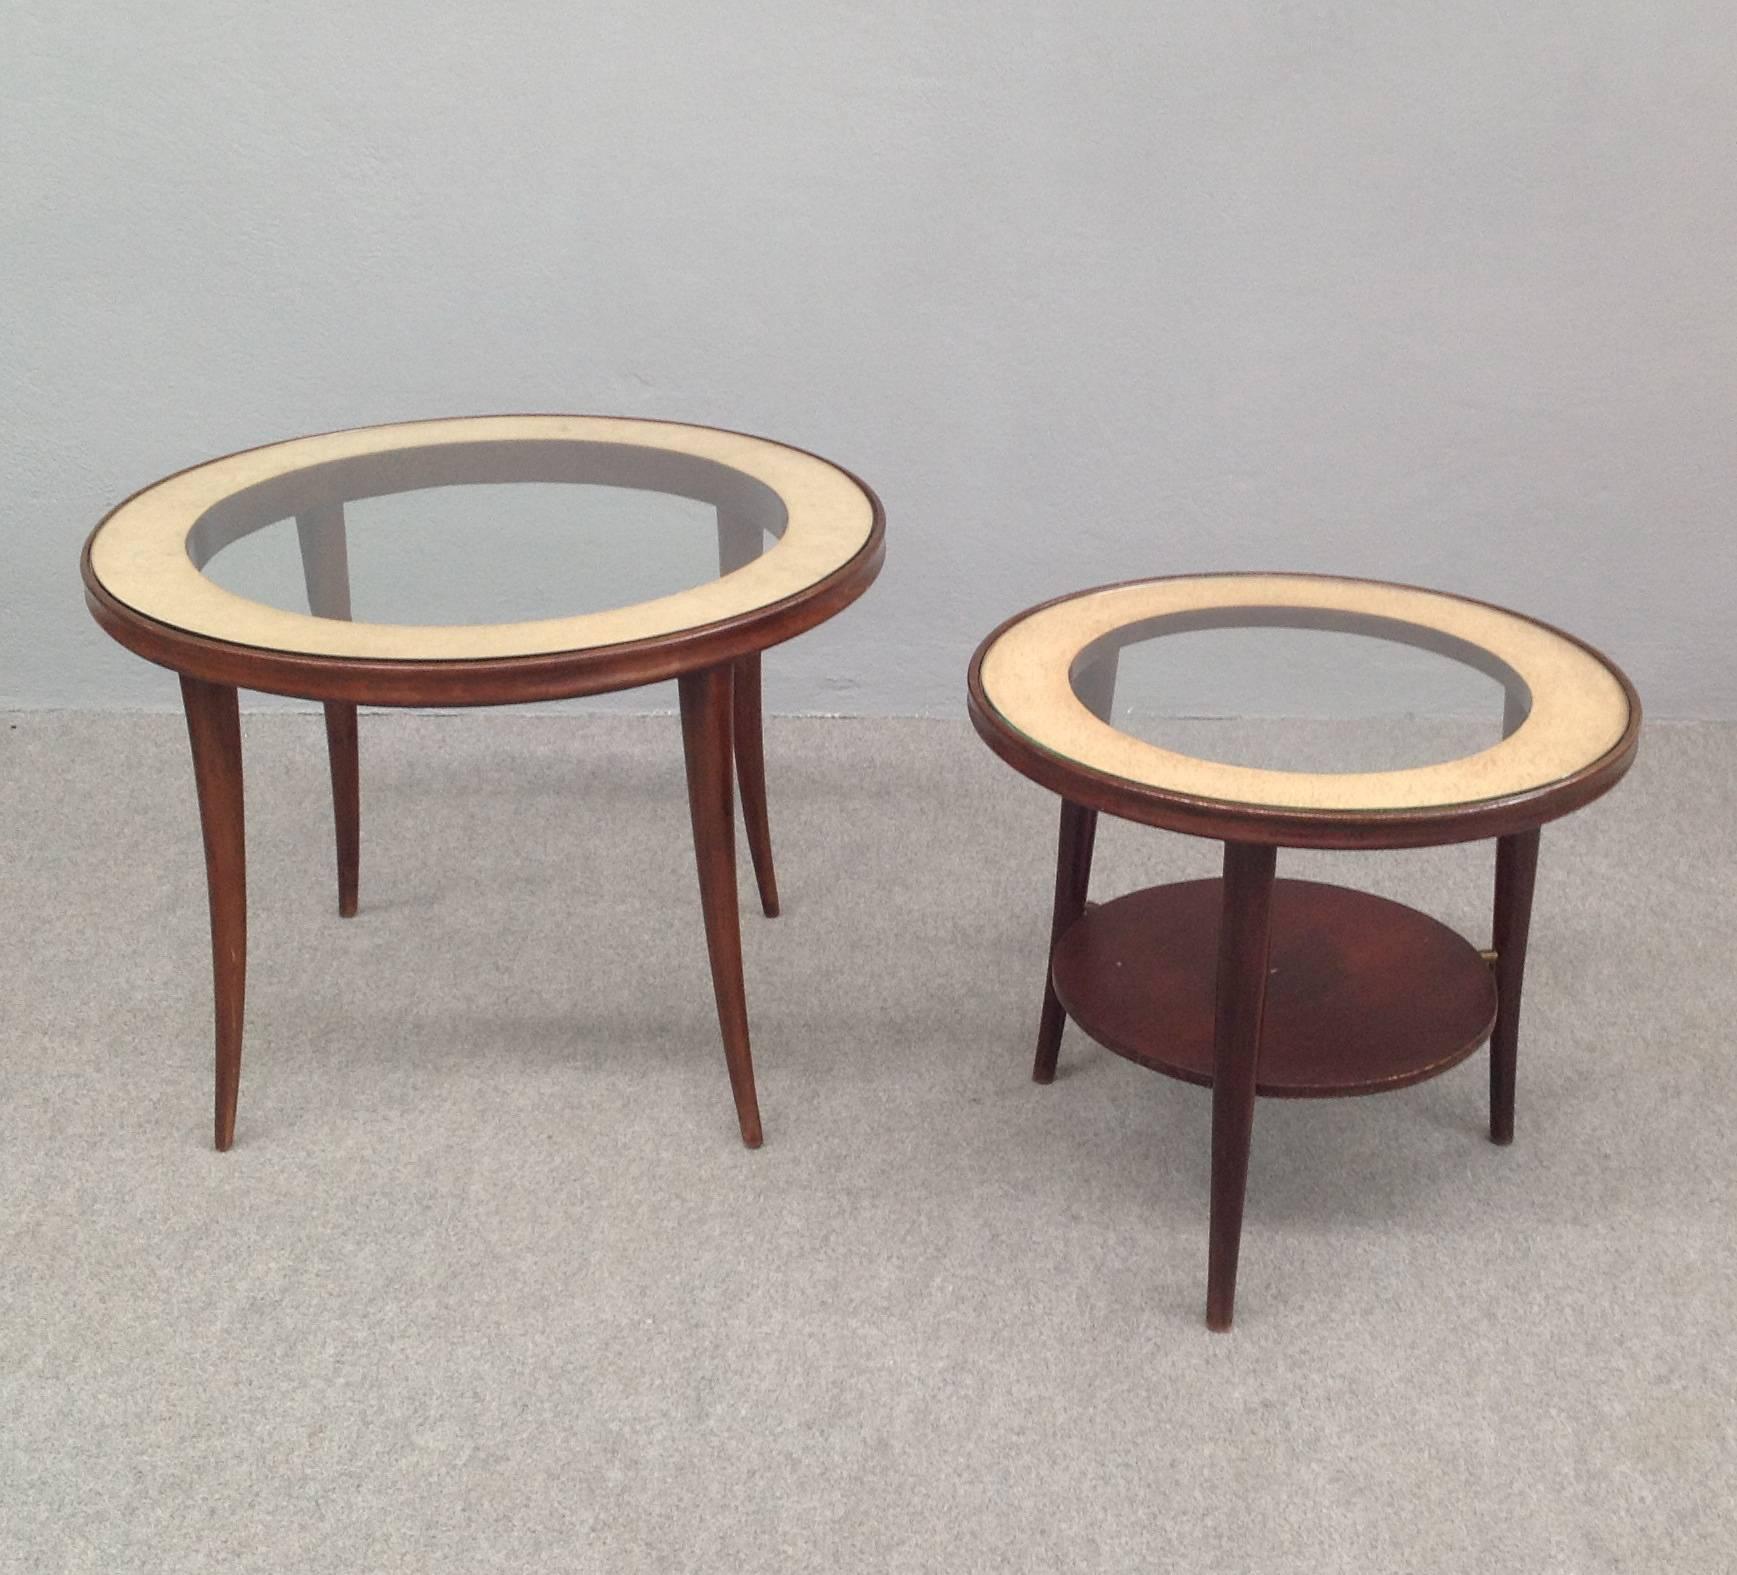 Stunning set of two wood, parchment and glass round side tables.
The little one has two tiers, wood and glass and parchment.
Measures's little table: Diameter- 53 cm height- 48 cm.